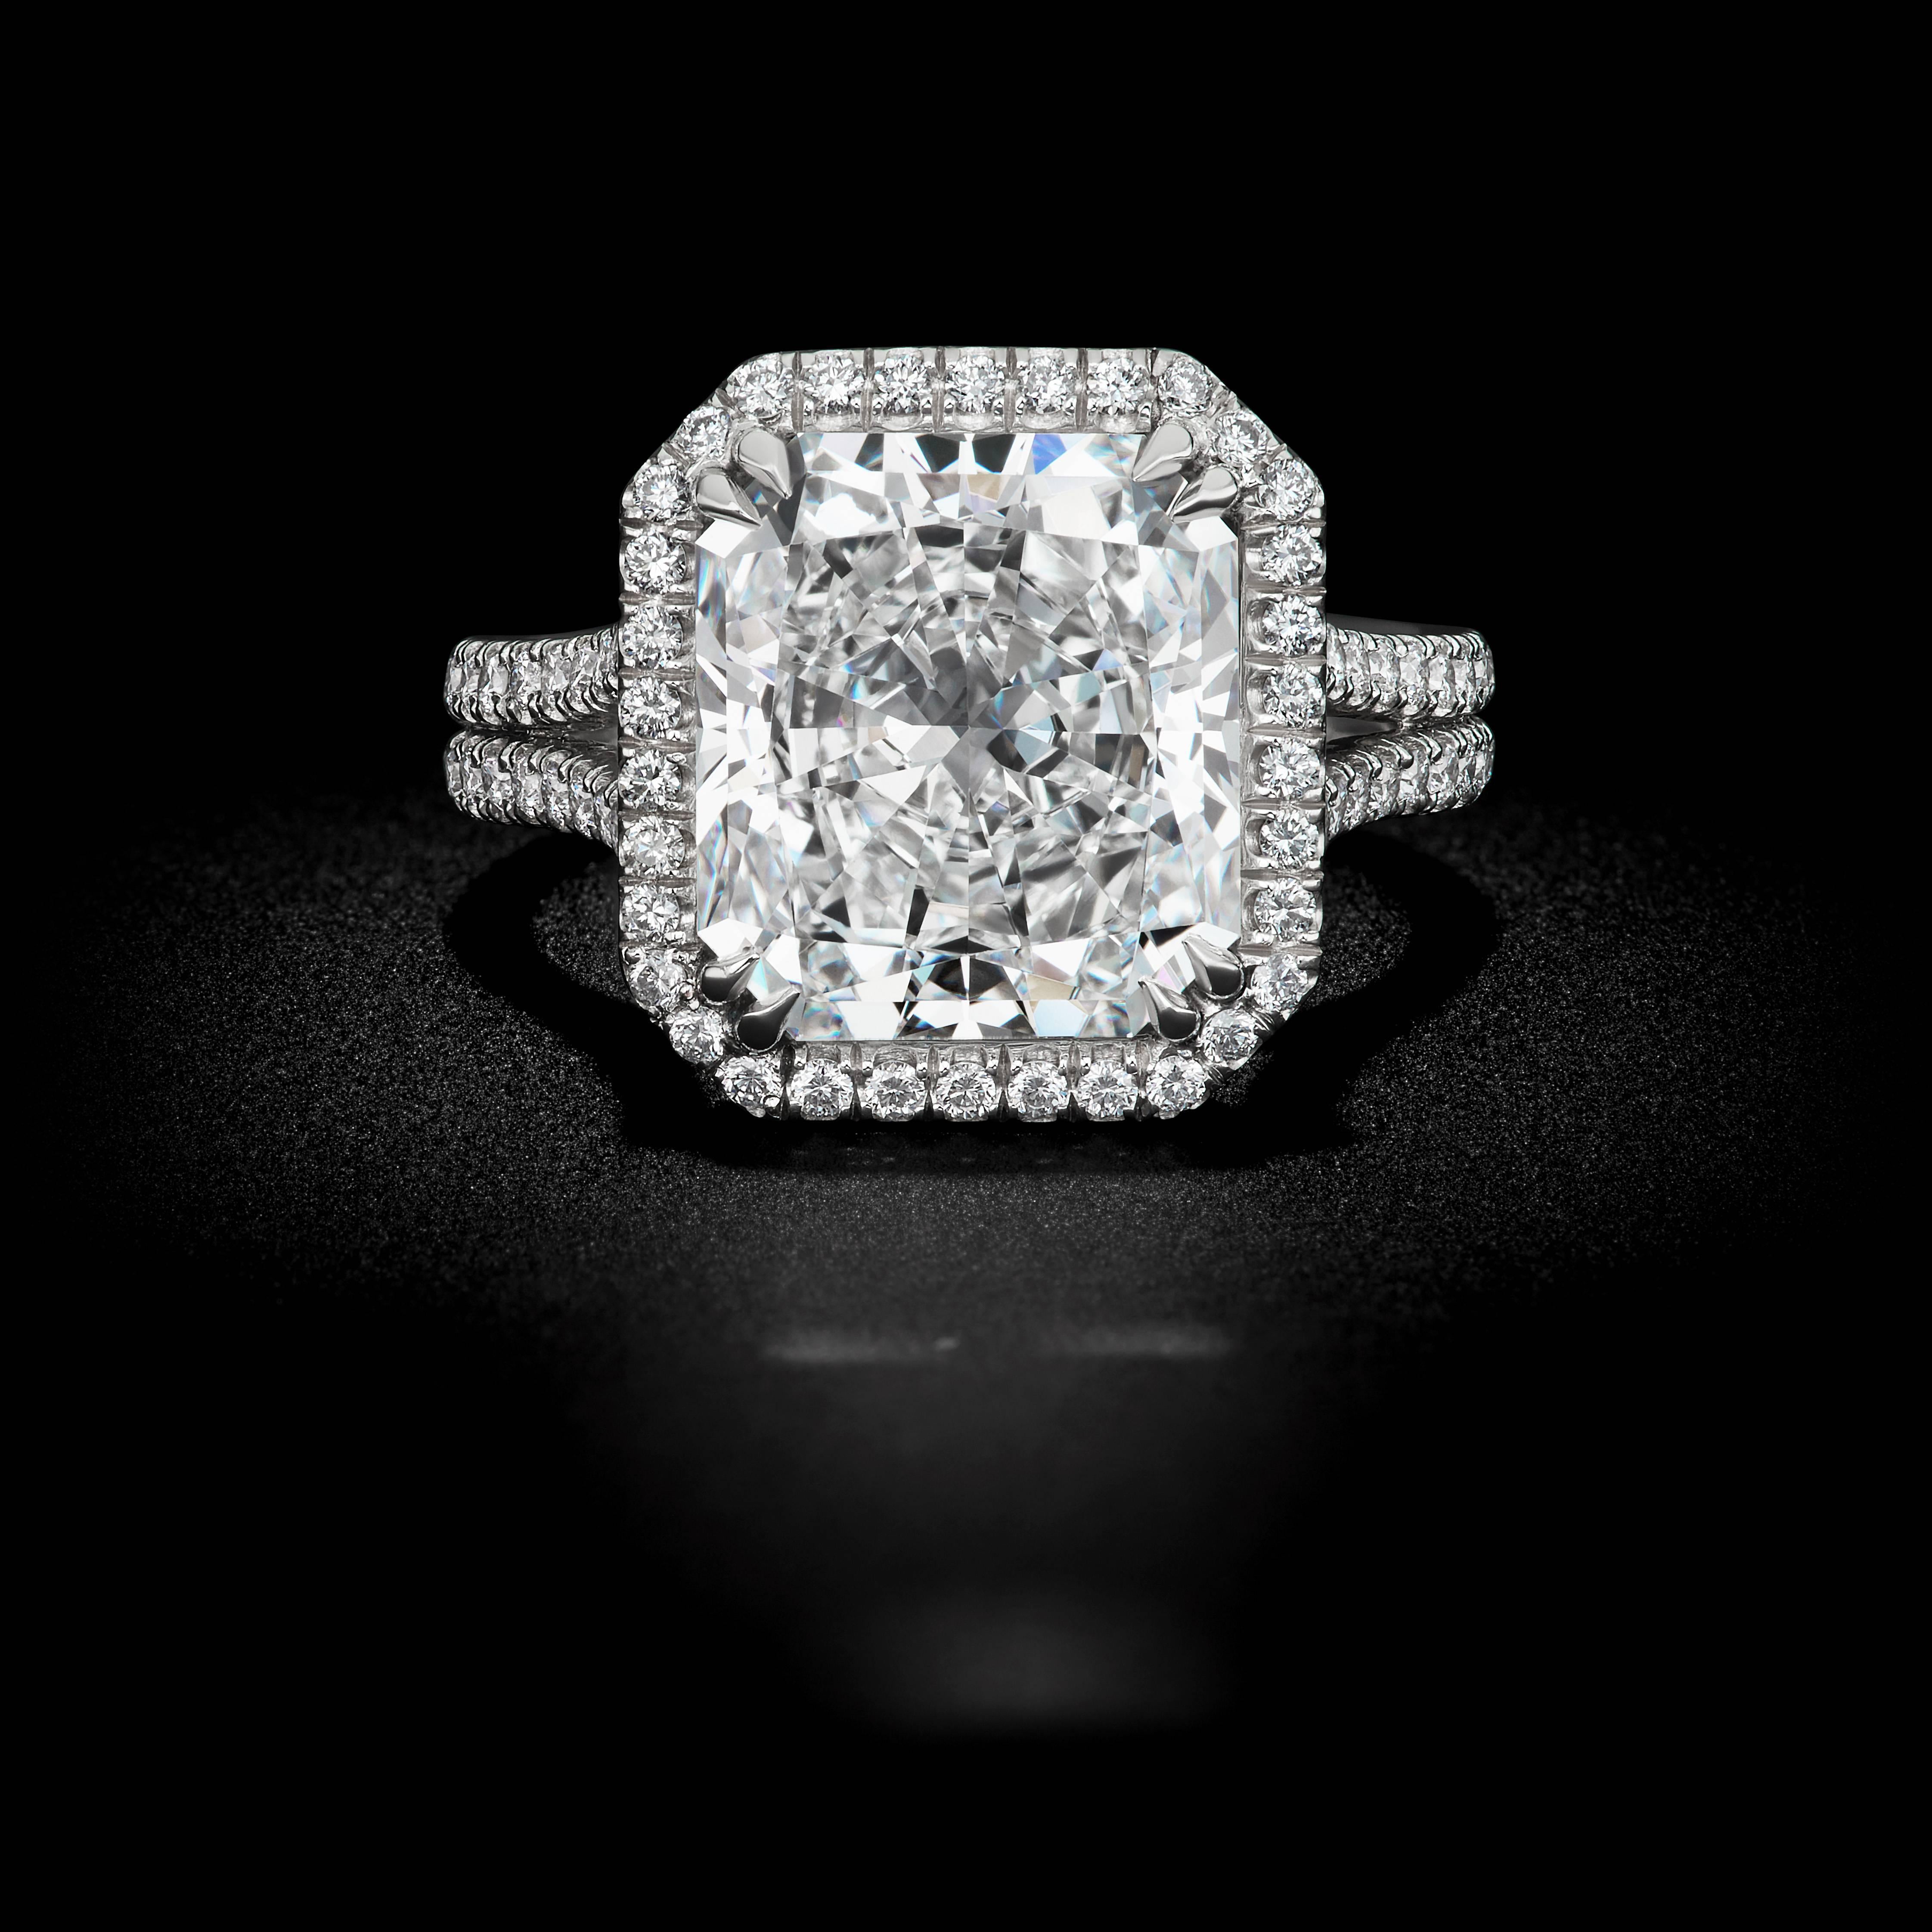 This spectacular 5.52ct Radiant cut diamond ring is set in a beautiful David Rosenberg platinum setting with a color and clarity of E VS1. Along with an elegant micro-pave halo setting with round brilliant diamonds of 1.32tw. This ring is